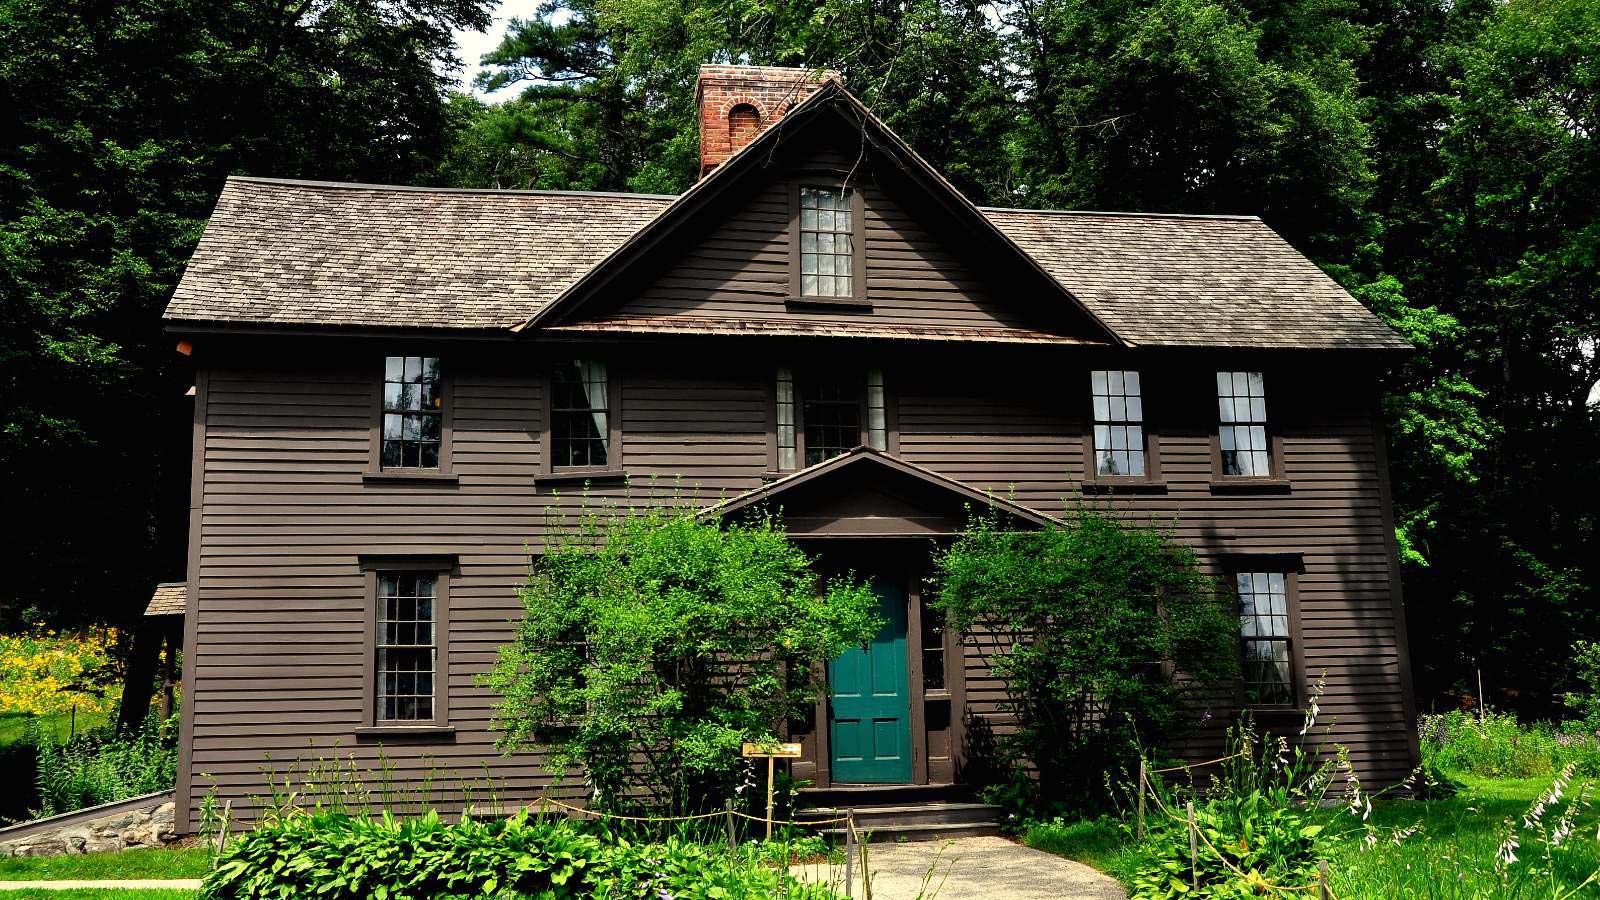 <p>The Orchard House is the home of Louisa May Alcott, the author of the 1868 classic novel Little Women. It is the first American woman to earn a living as a writer. The house offers open guided tours daily, except for a few different holidays, and it’s free.</p>